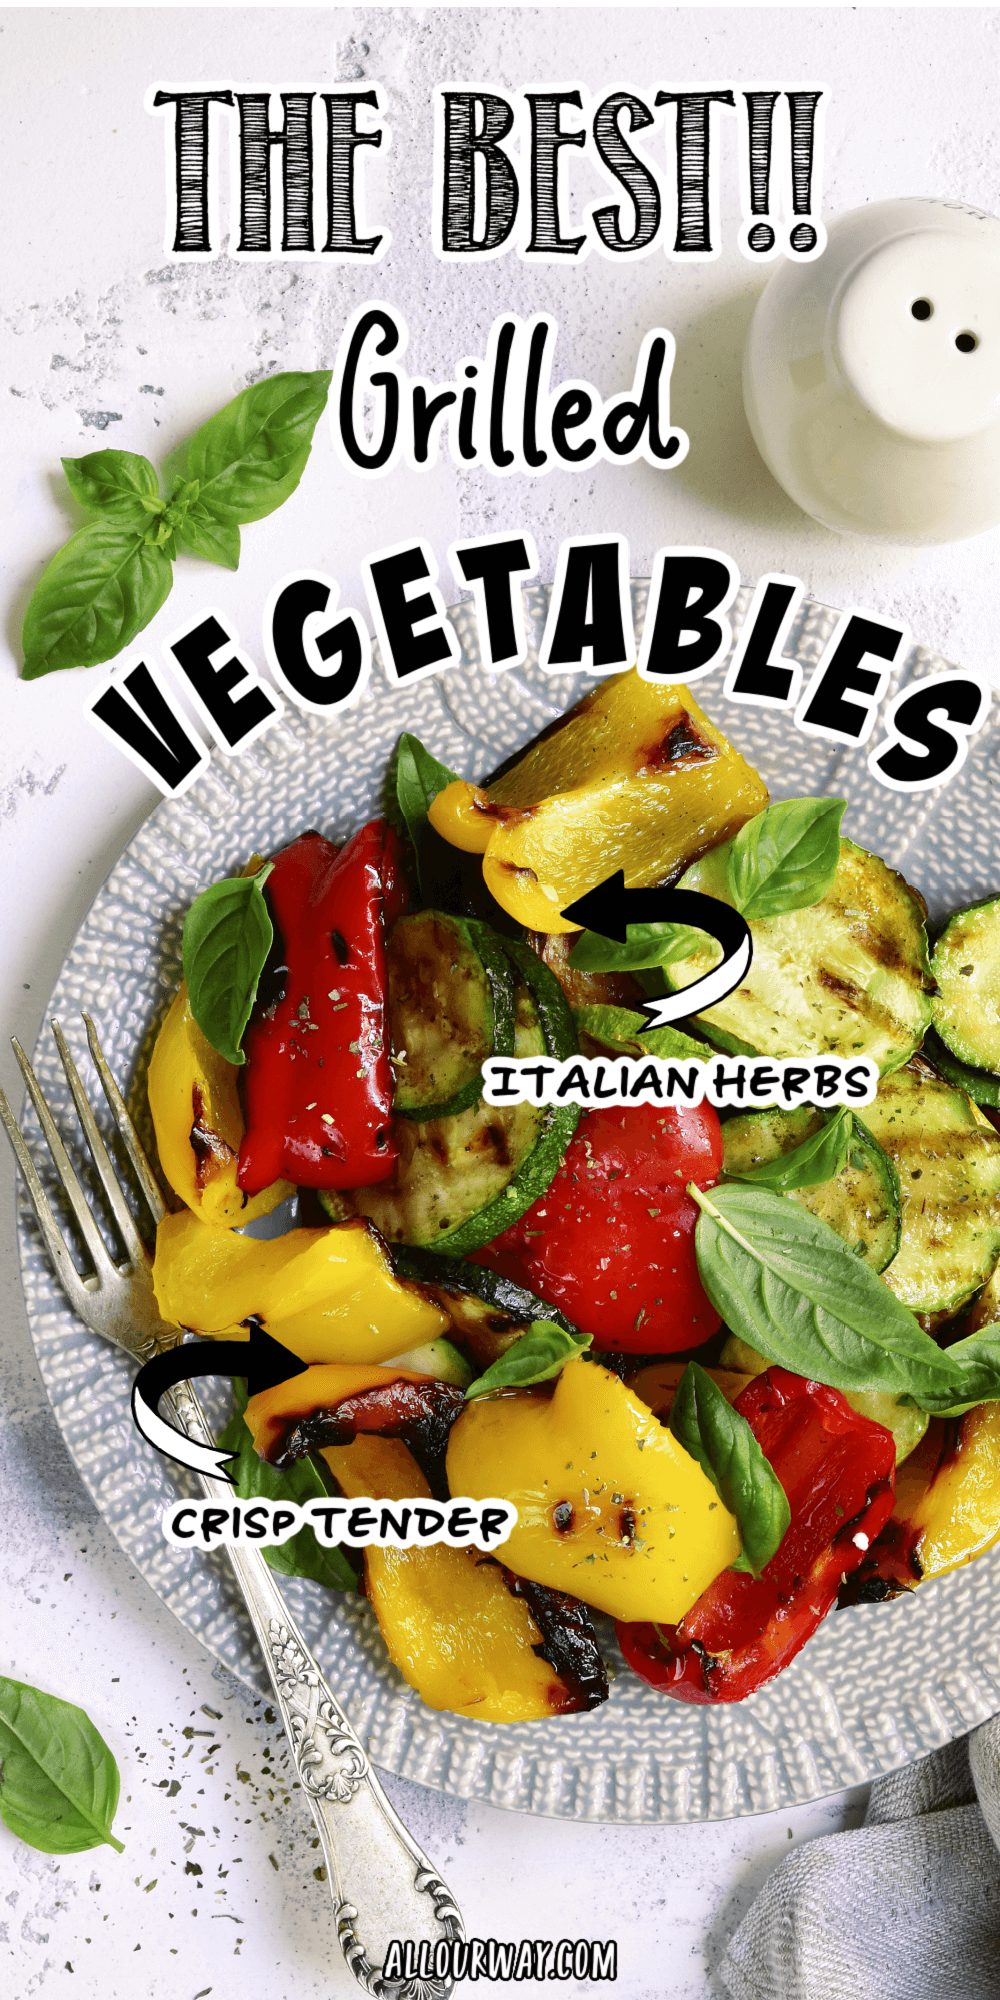 Italian grilled vegetables transforms ordinary veggies into a spectacular dish by cooking them until they are crisp tender. They are served with a tangy lemon vinaigrette and finished with a sprinkle of fresh basil.